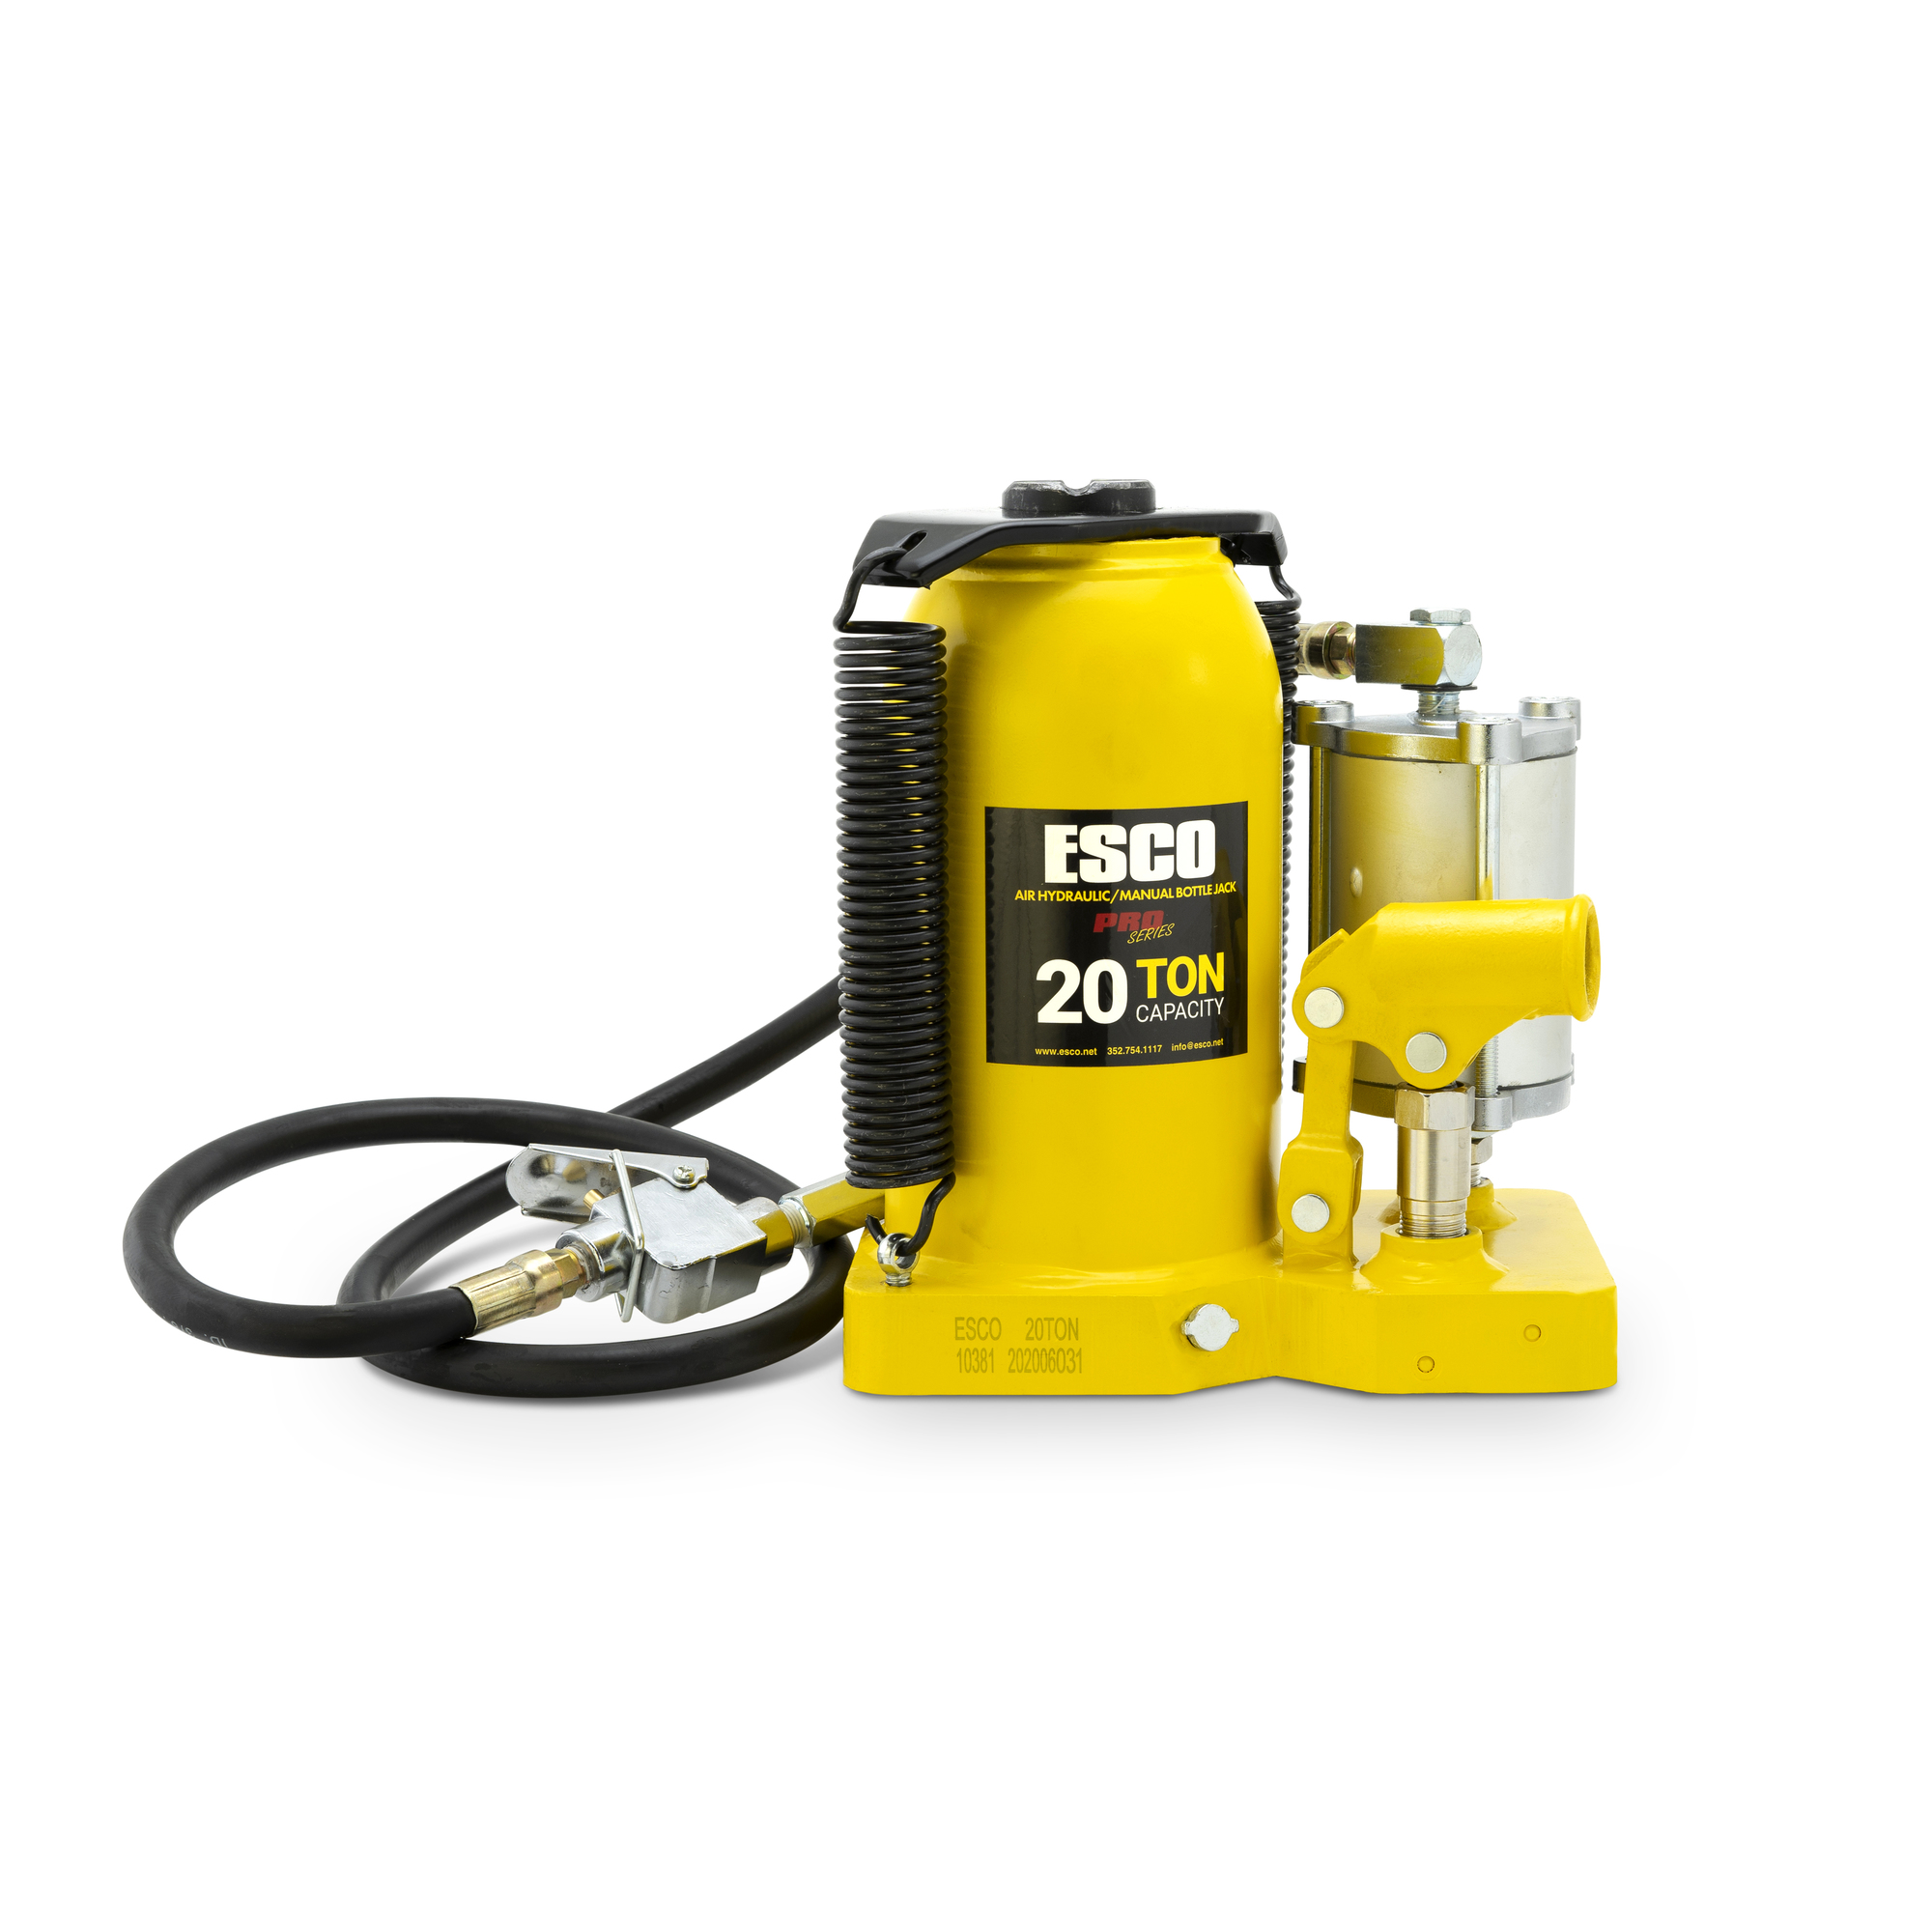 ESCO, 20 Ton Pro Series Air/Hydr Bottle Jack, Lift Capacity 20 Tons, Max.  Lift Height 20 in, Min. Lift Height 10 in, Model# 10381 Northern Tool